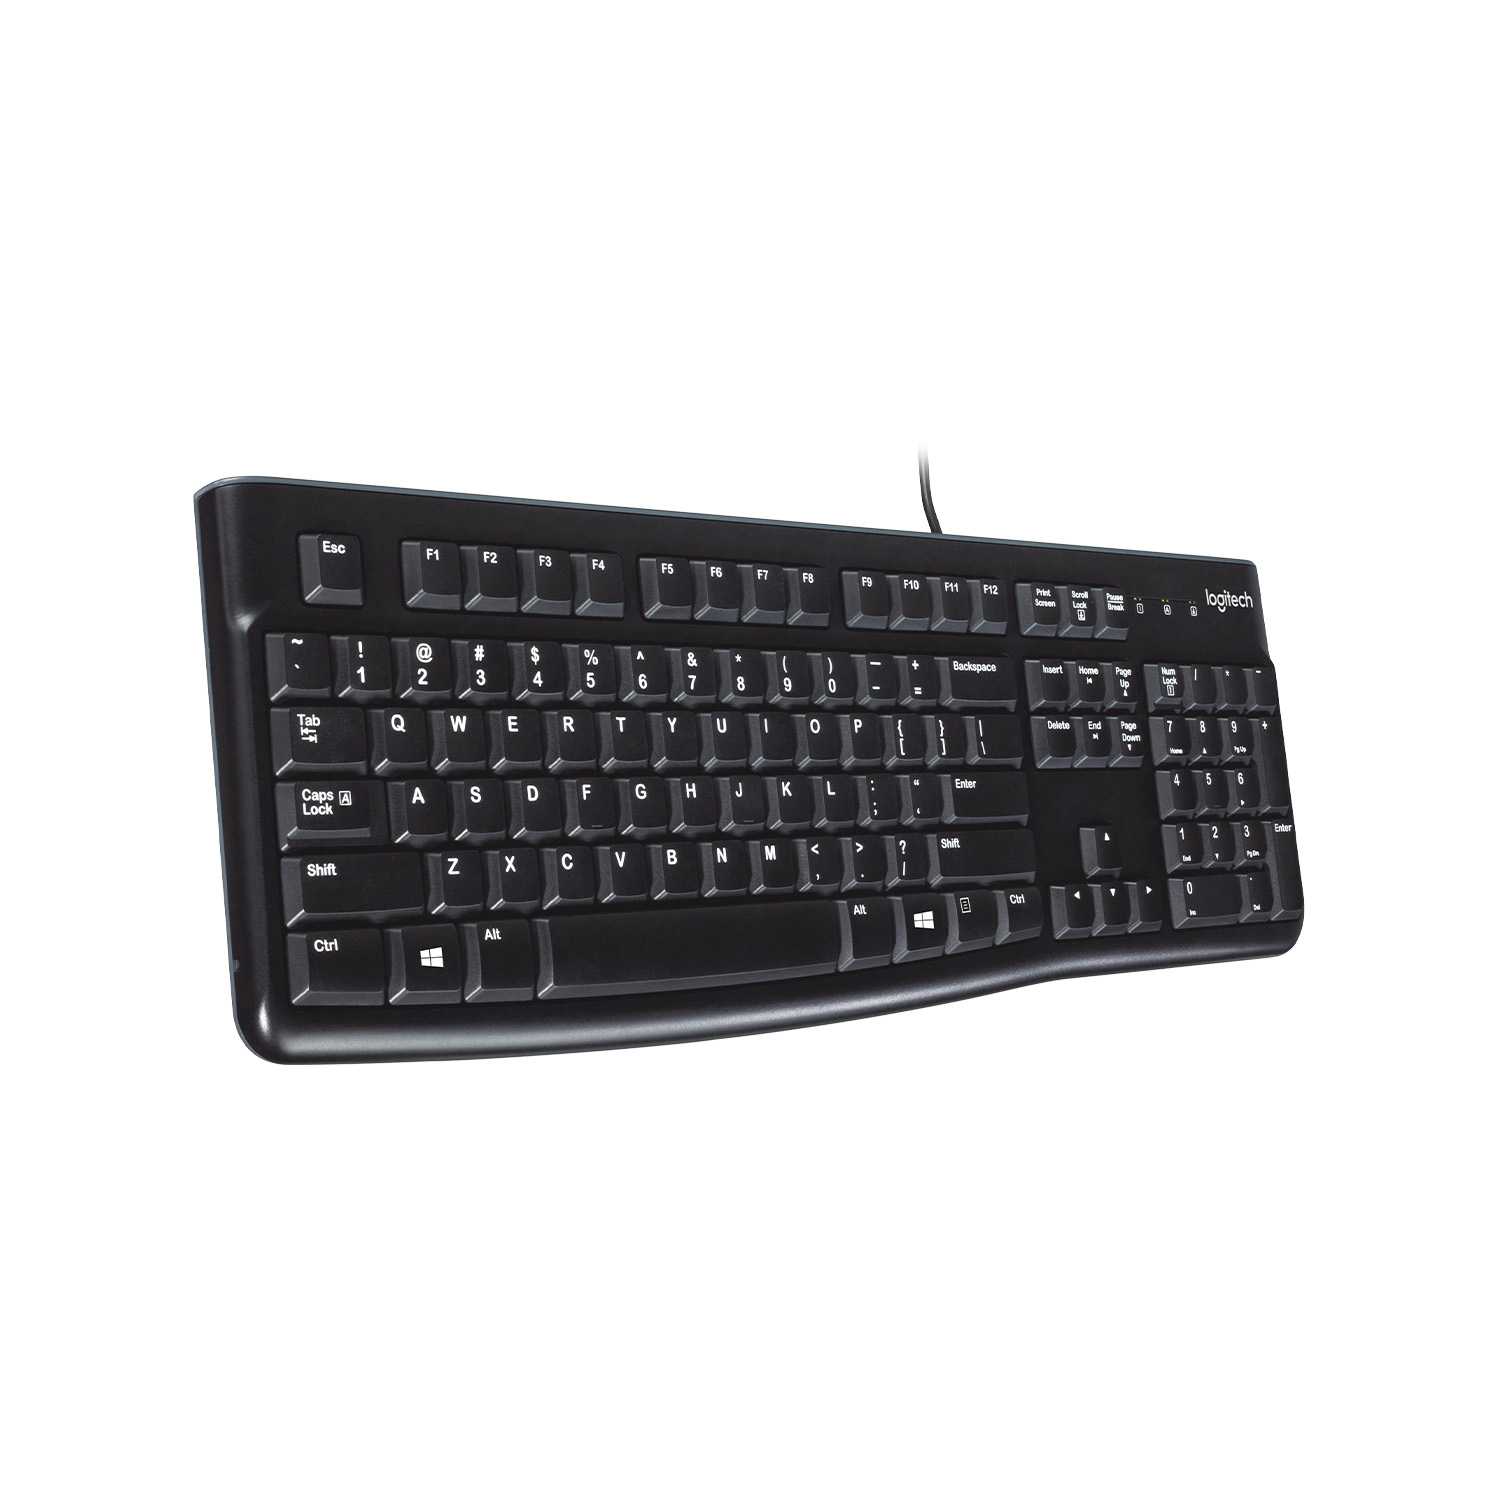 Logitech K120 Wired Keyboard for Windows, USB Plug-and-Play, Full-Size, Spill-Resistant, Curved Space Bar, Compatible with PC, Laptop, Black - image 1 of 7